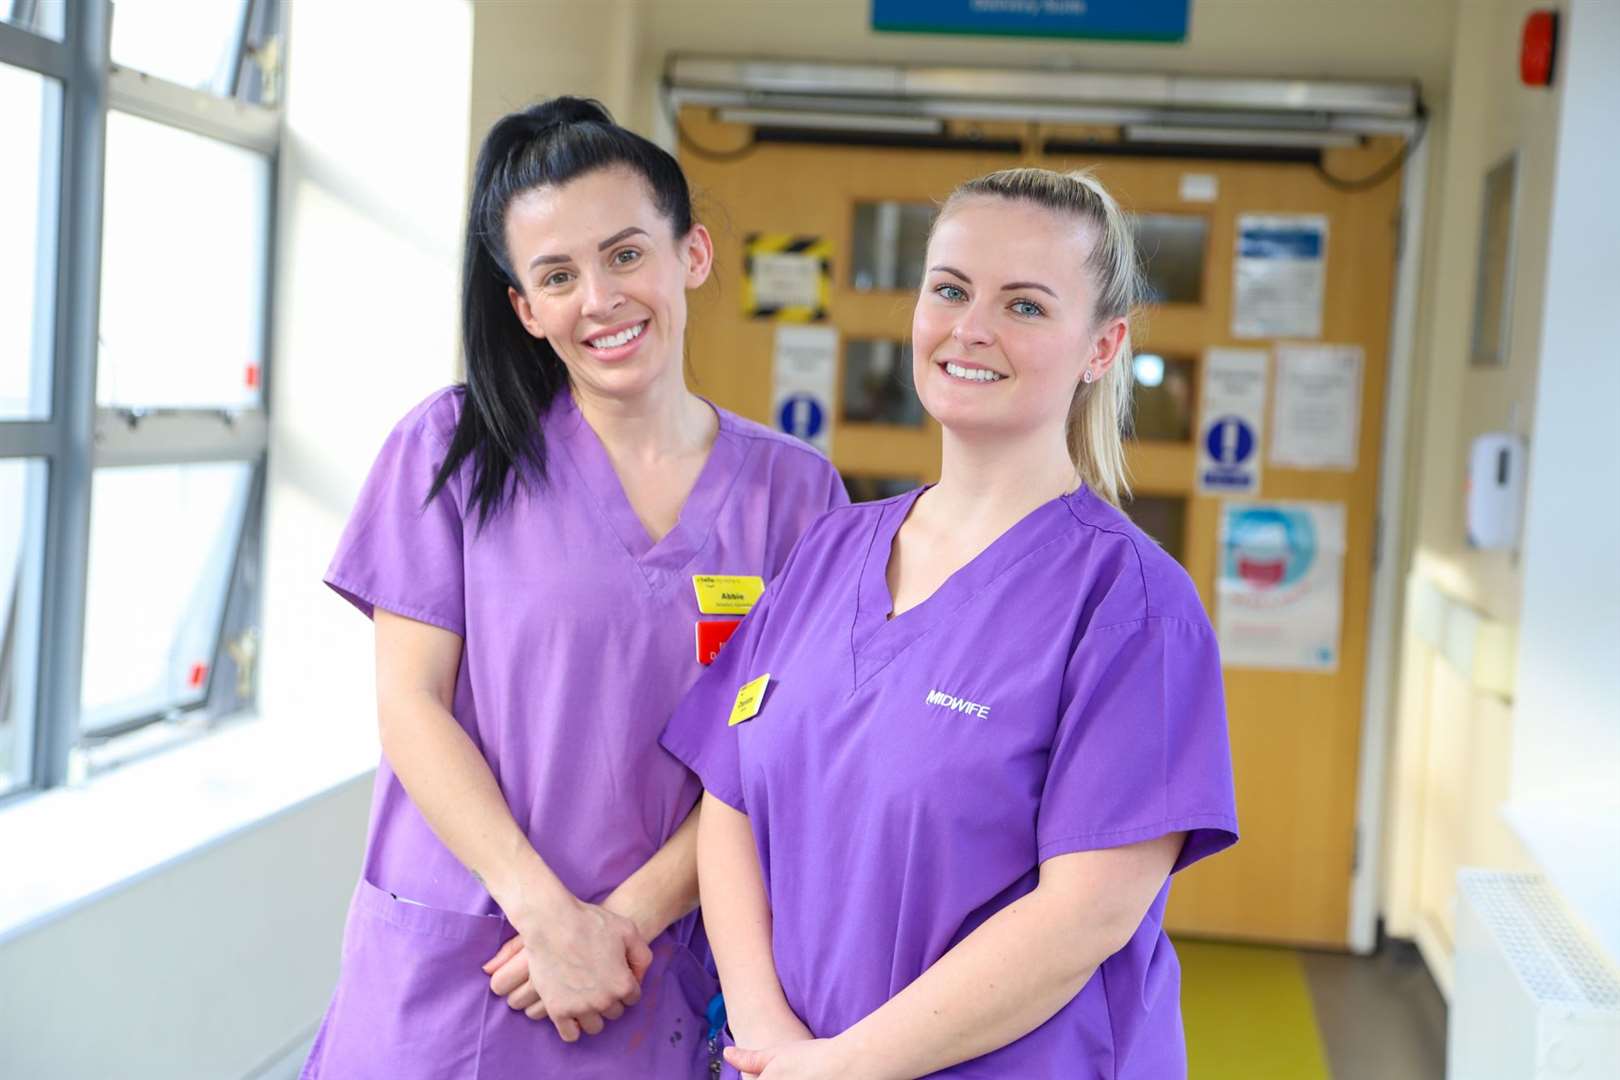 Abbie Hadlow, left, and Charlotte Slater have become Medway NHS Foundation Trust’s first "home-grown" midwives after they completed a three-year midwifery degree apprenticeship